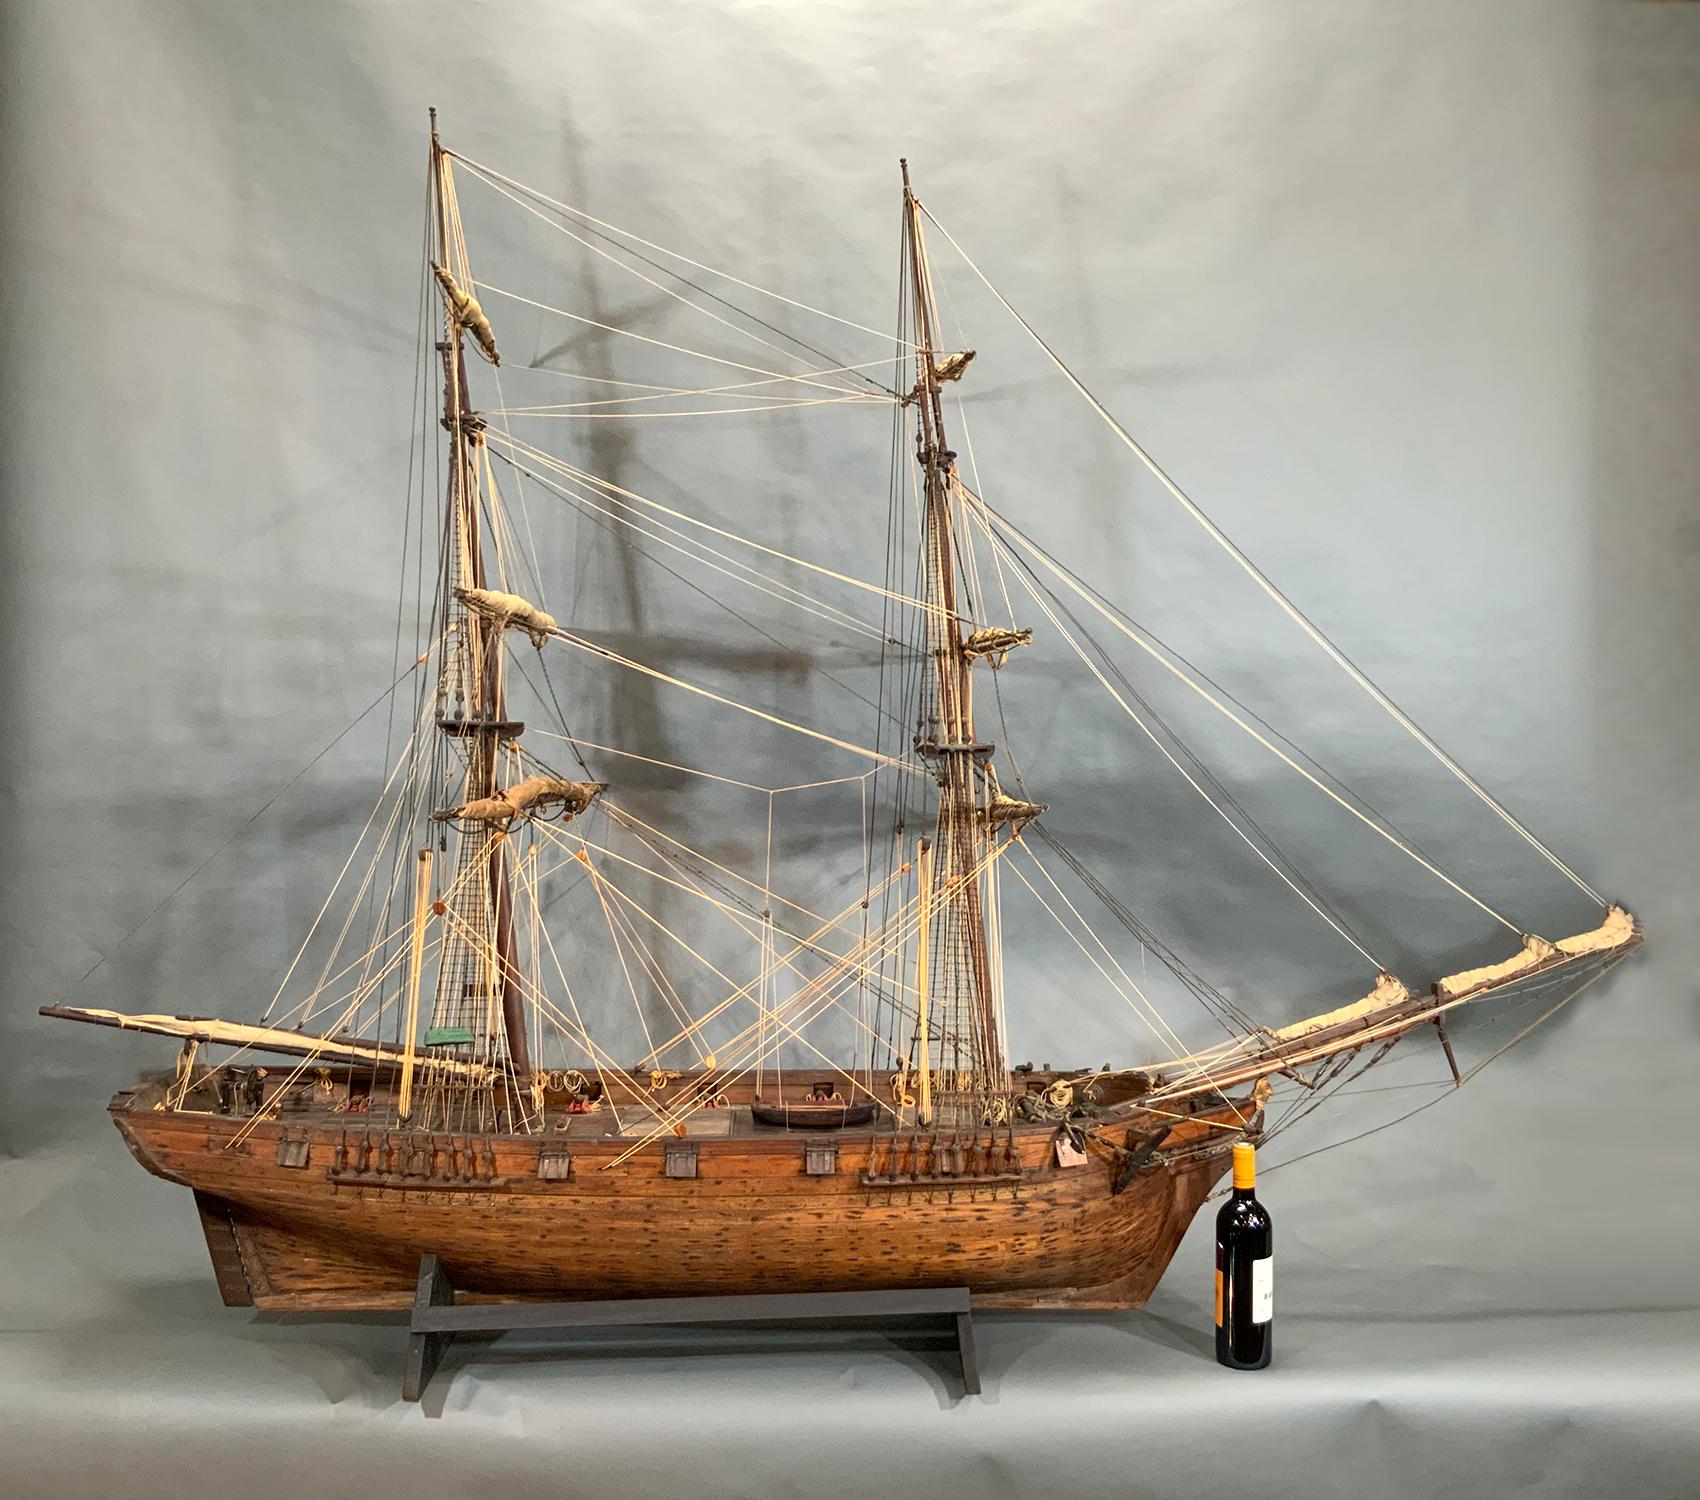 Nineteenth Century ship model of an American Brig from the esteemed New Bedford Whaling Museum, formerly the Old Dartmouth Historical Society, with carved trail boards, planked hull and deck. Completely rigged, furled sails, hinged gun ports, etc.